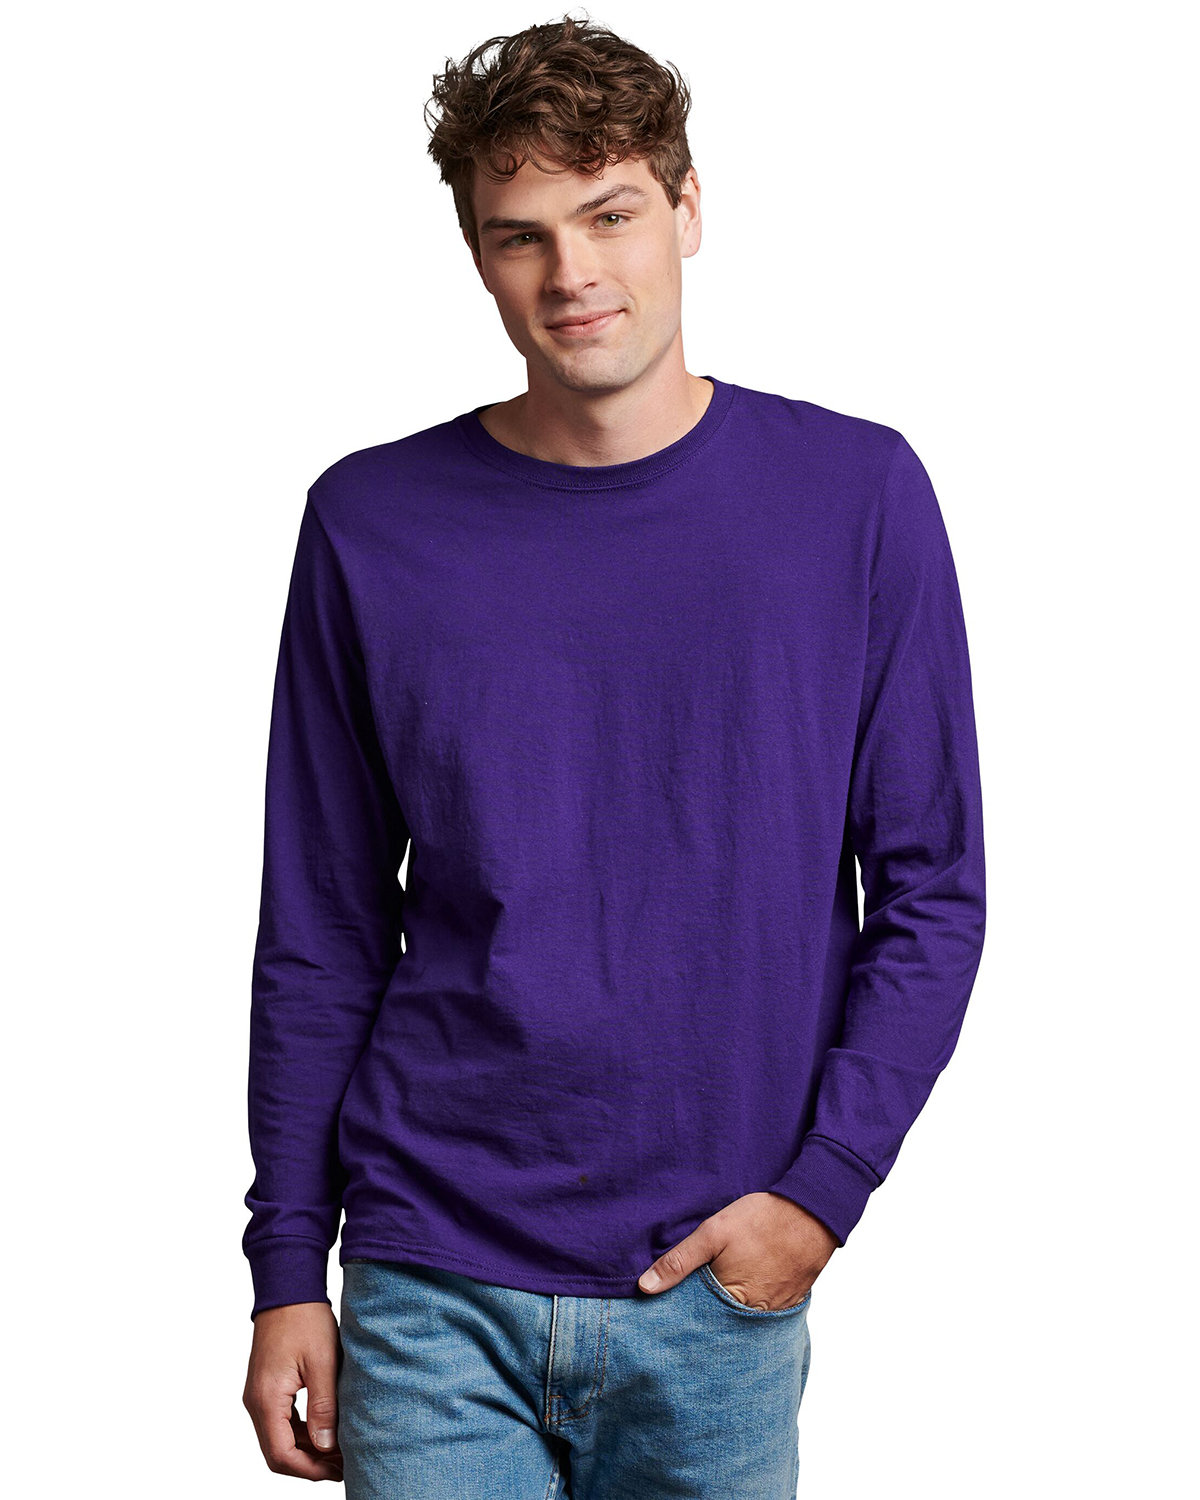 Russell Athletic Unisex Essential Performance Long-Sleeve T-Shirt PURPLE 